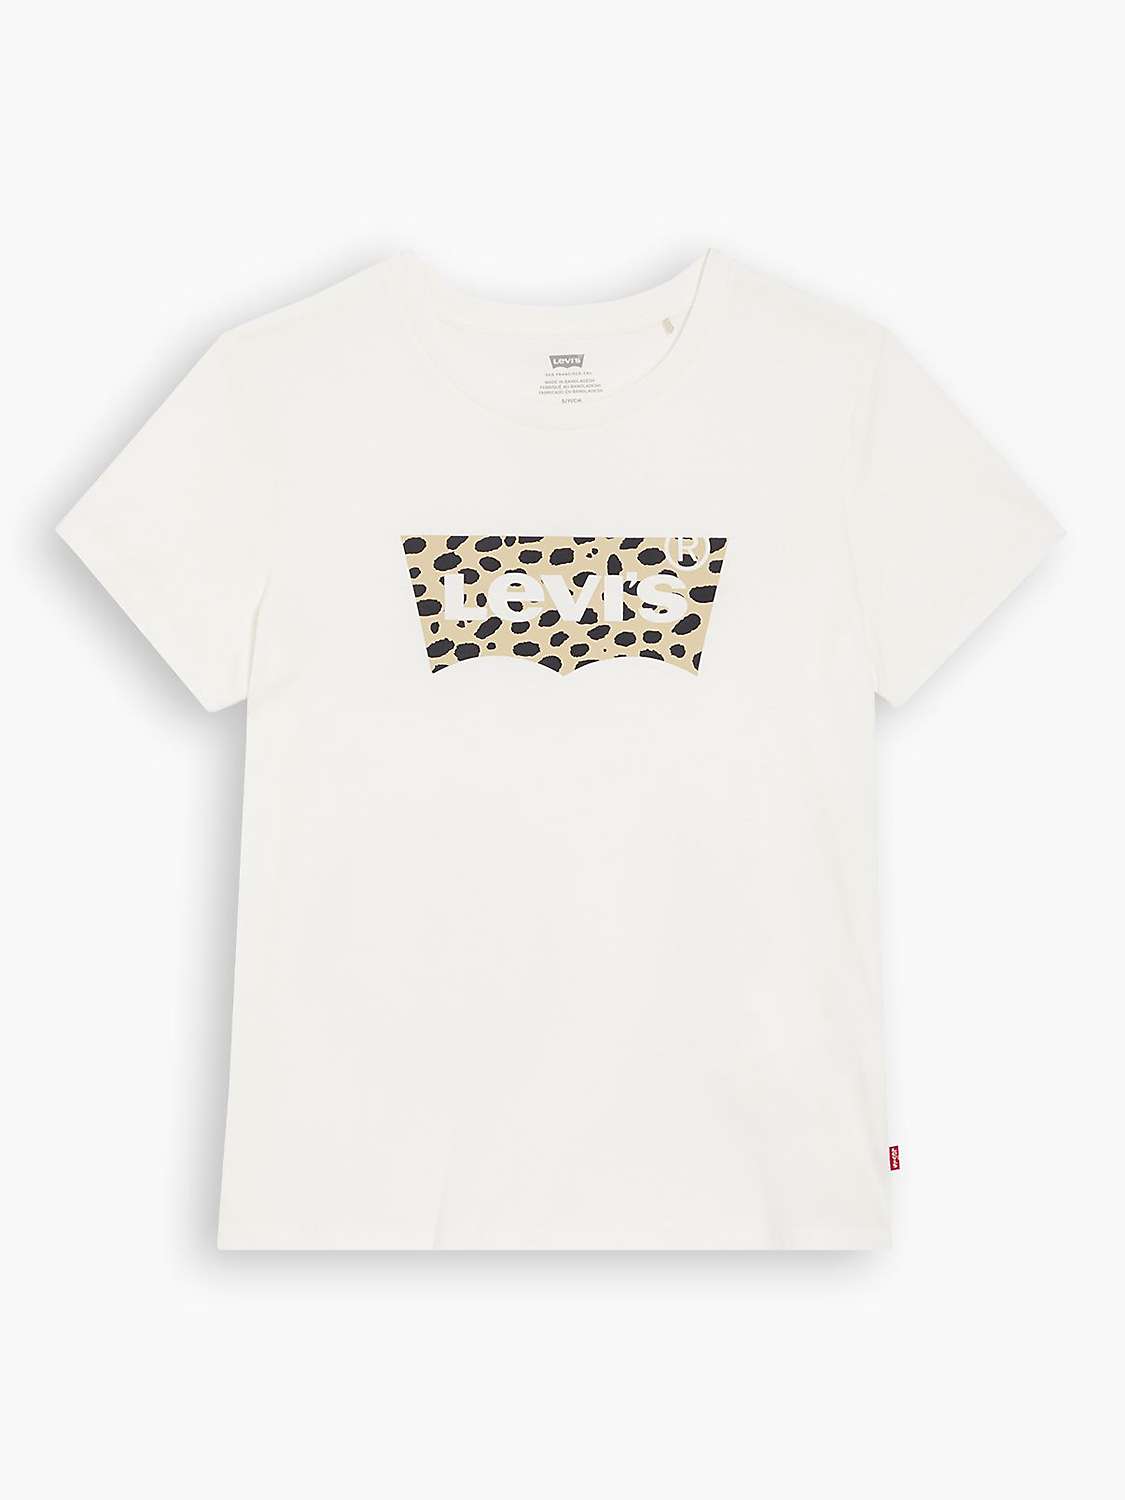 Buy Levi's The Perfect T-Shirt Online at johnlewis.com